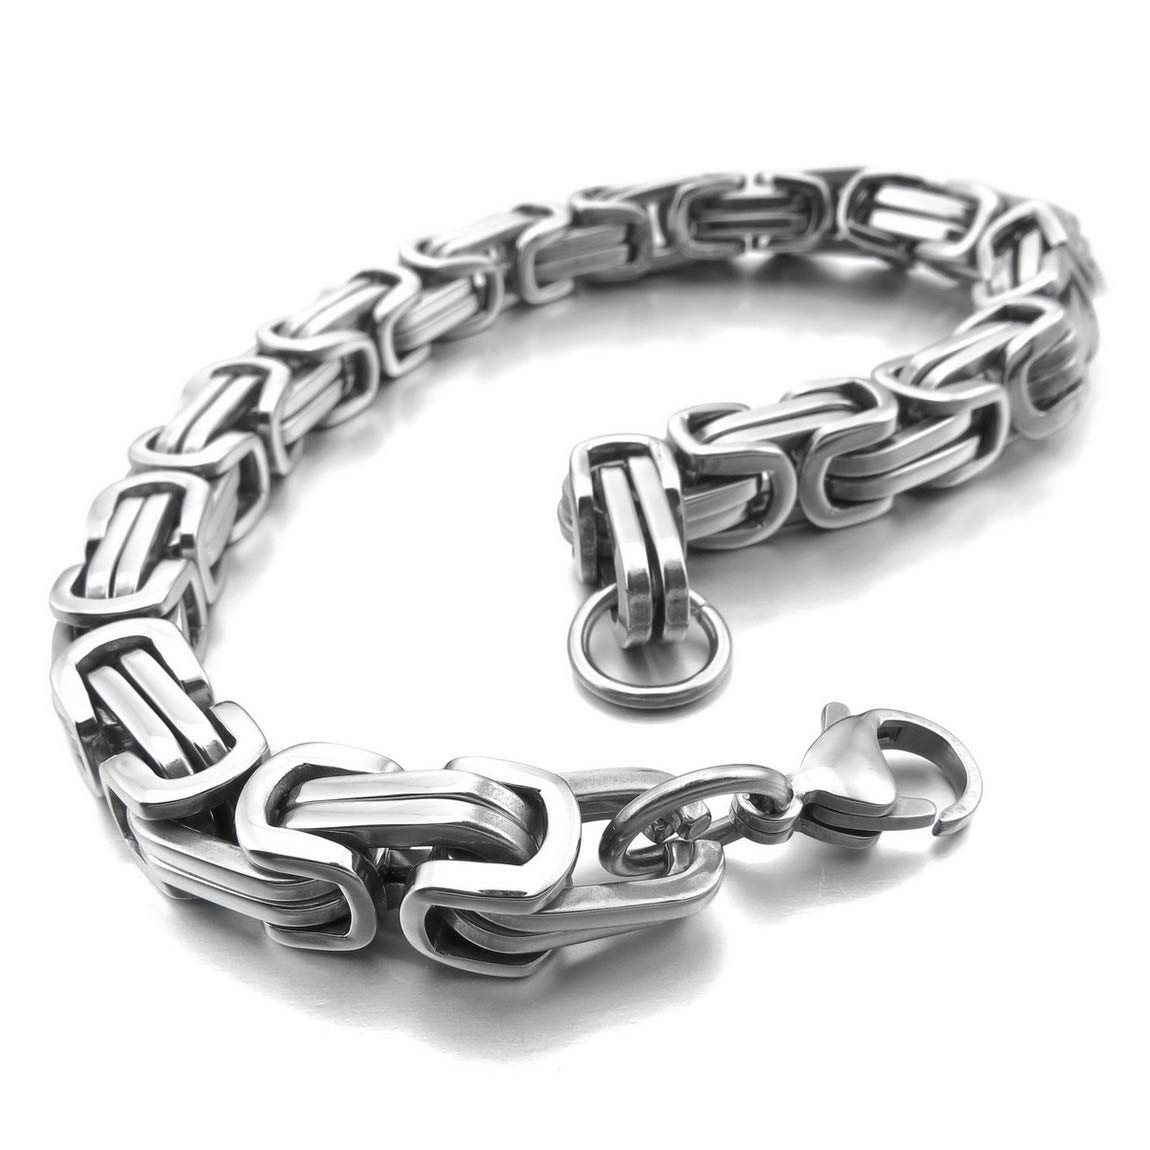 INBLUE 8mm Wide 316L Stainless Steel Bracelet Byzantine Link Chain Bracelet for Men Women Boys Water Resistance (5 Colors - Silver Black Gold Silver and Silver and Gold, 4 Lengths - 7.5